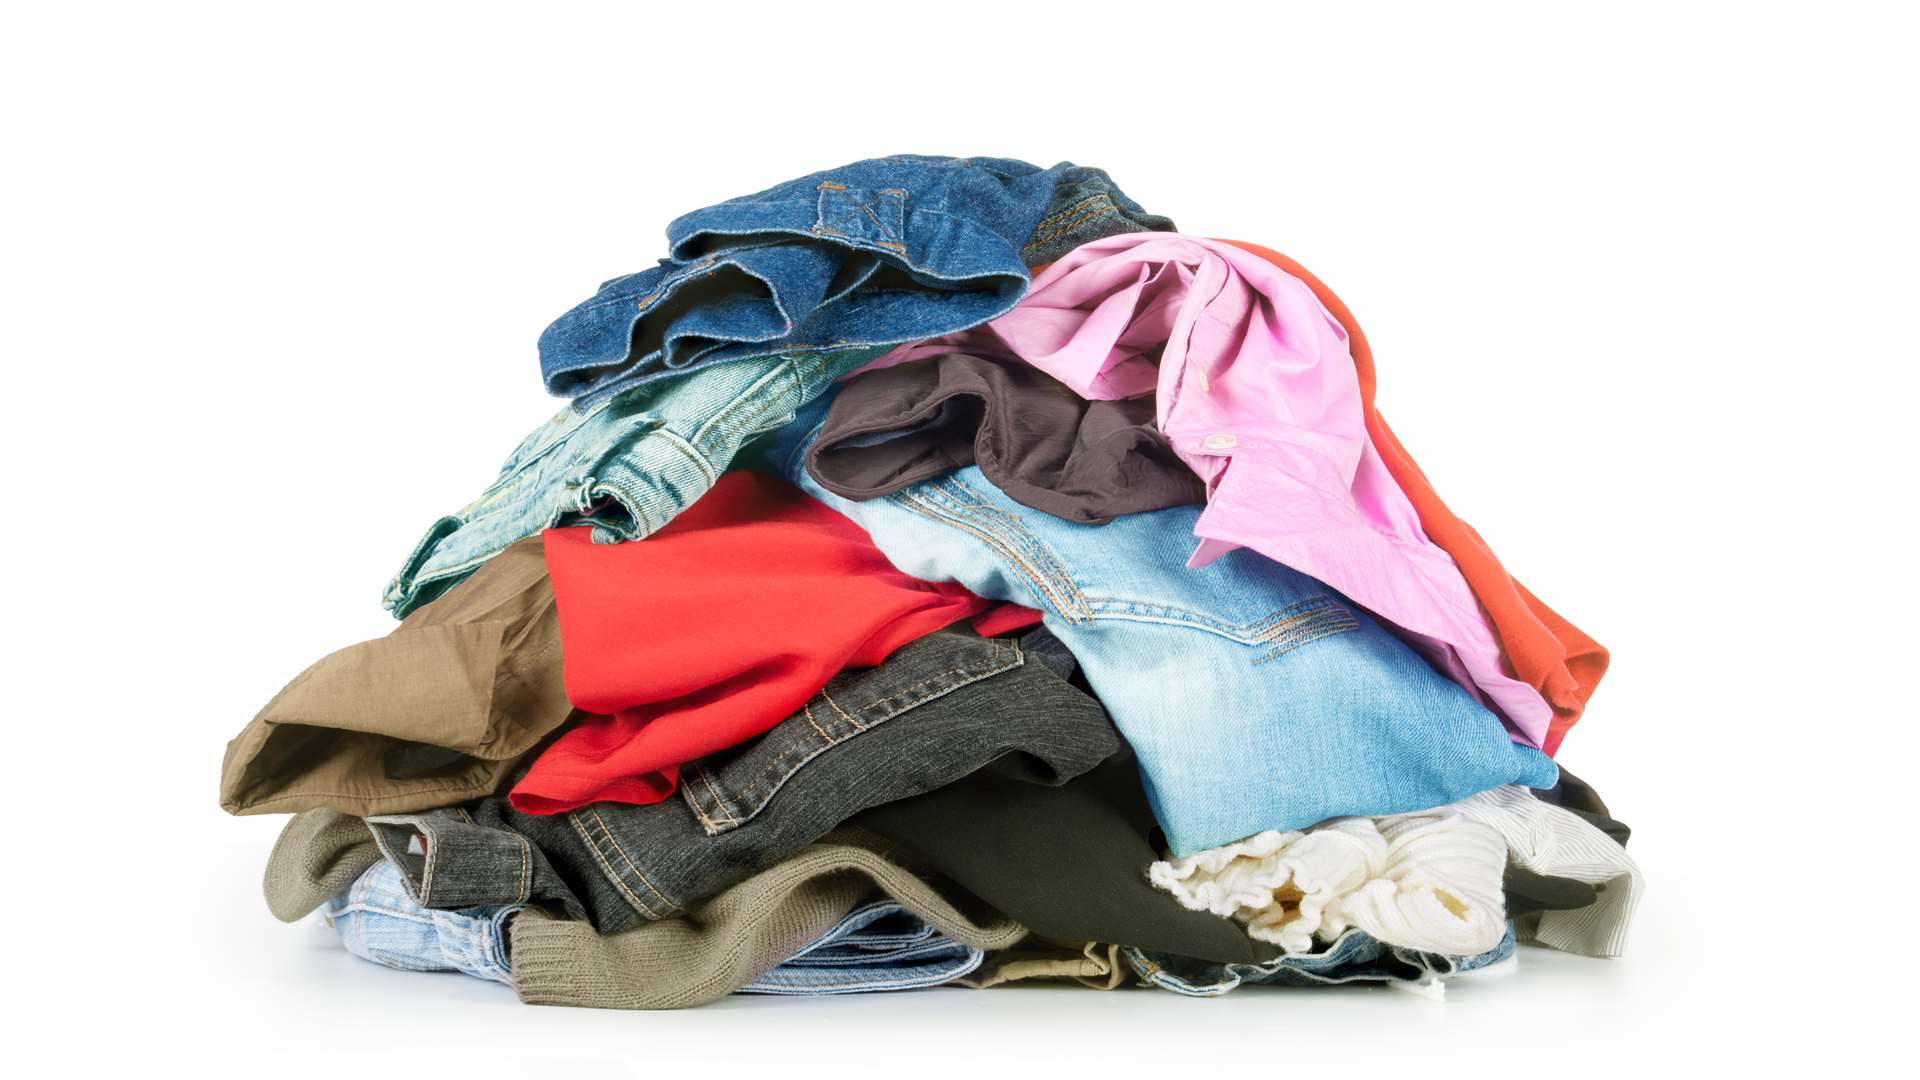 One man stole clothing worth £180. Picture: GettyImages